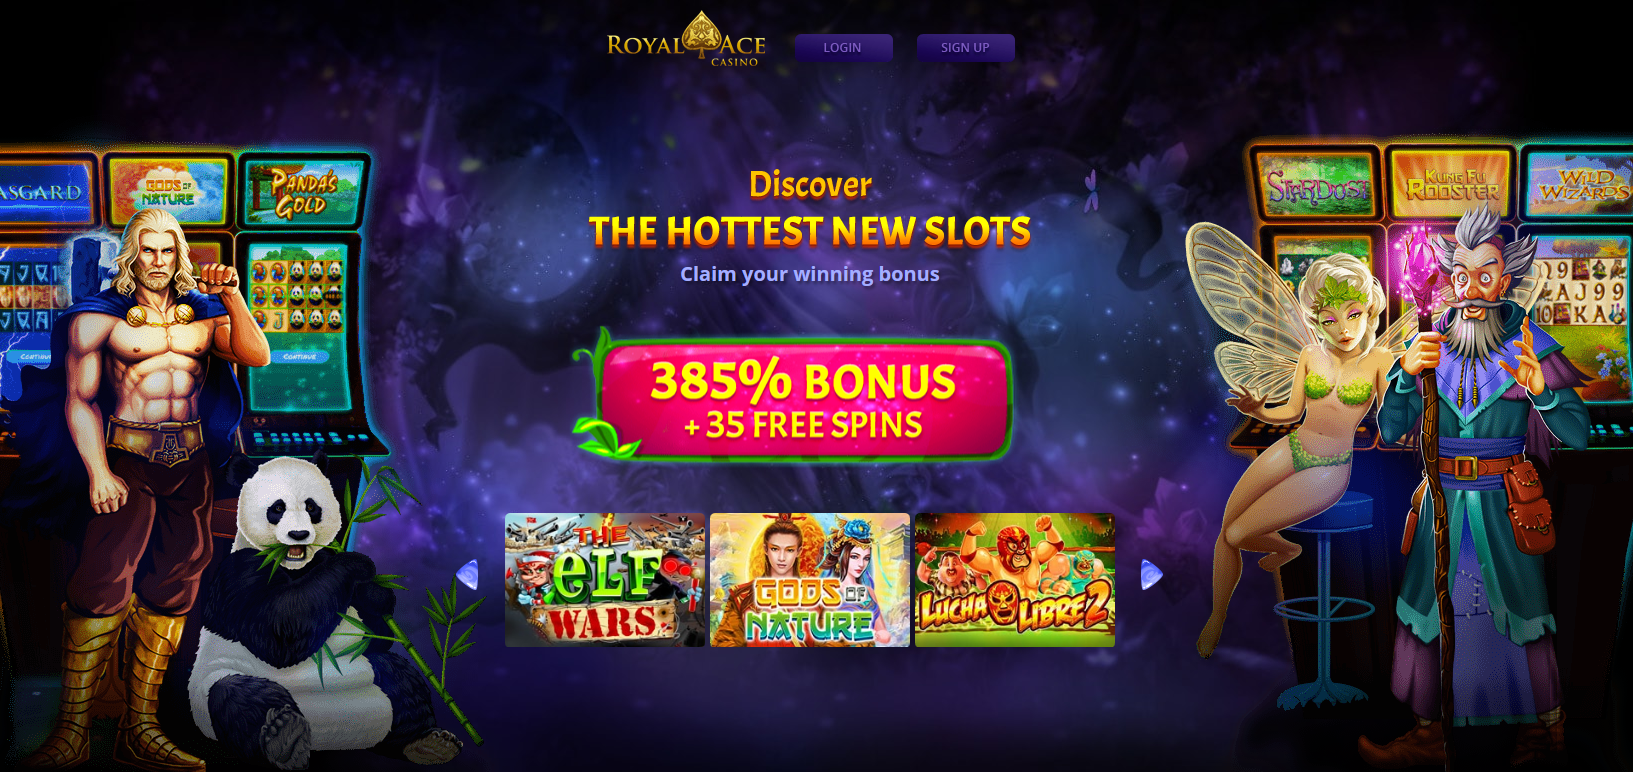 Royal Ace Casino - Big wins are waiting